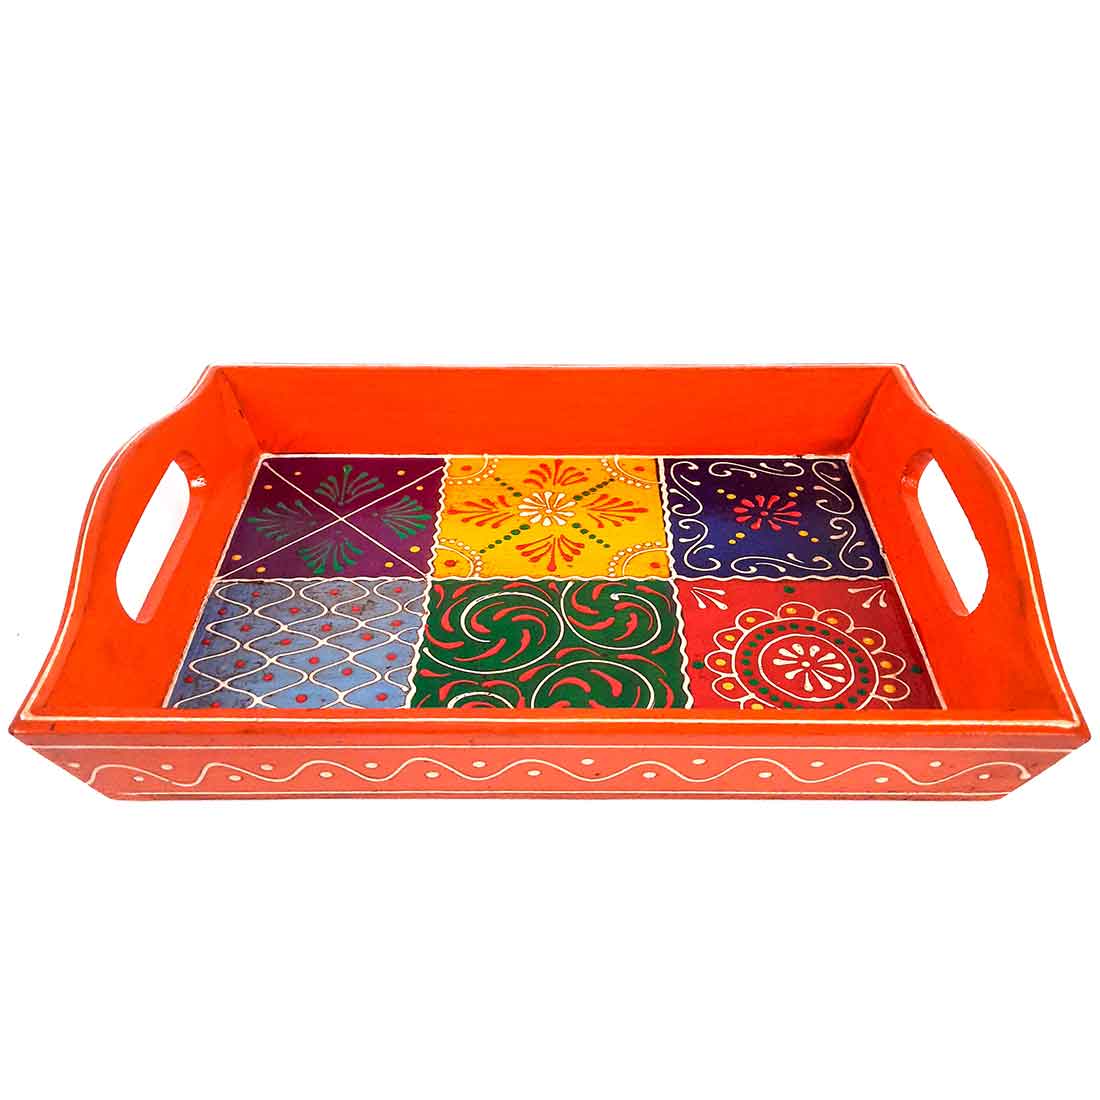 Serving Tray | Wooden Tray - 11 Inch - ApkaMart